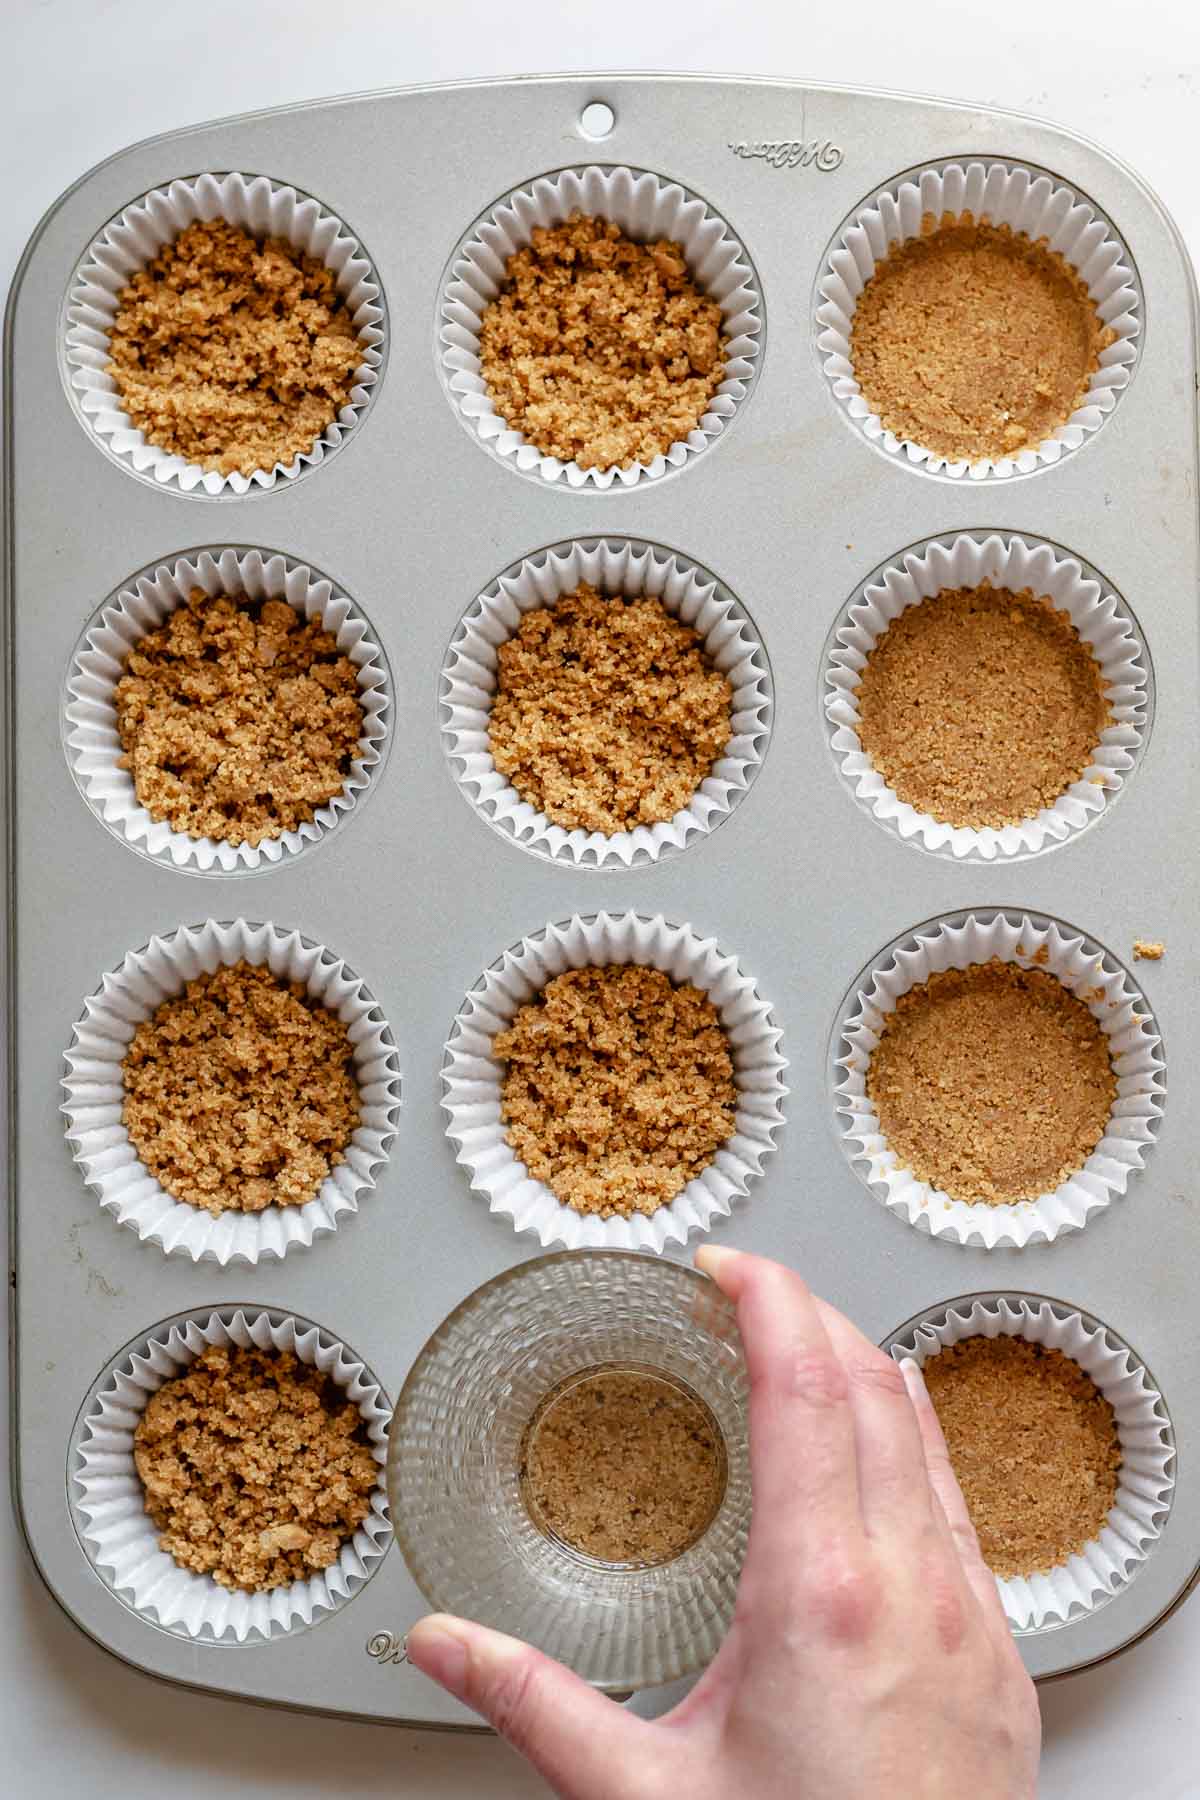 Graham cracker crumbs being pressed into a muffin tin.